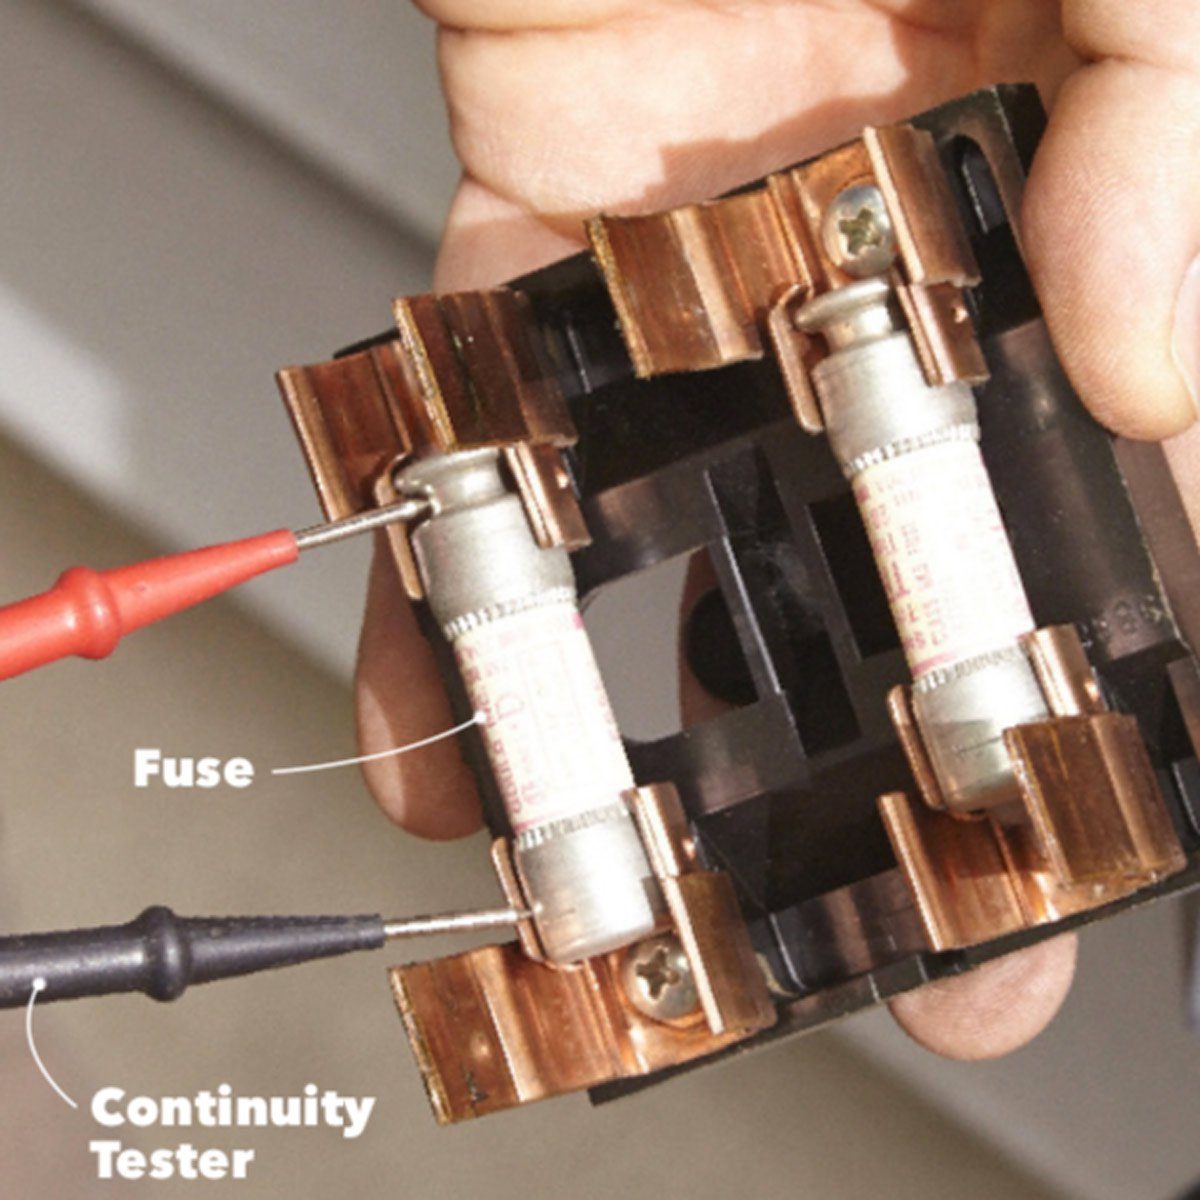 Checking to see if fuses are burnt out with continuity tester | Construction Pro Tips